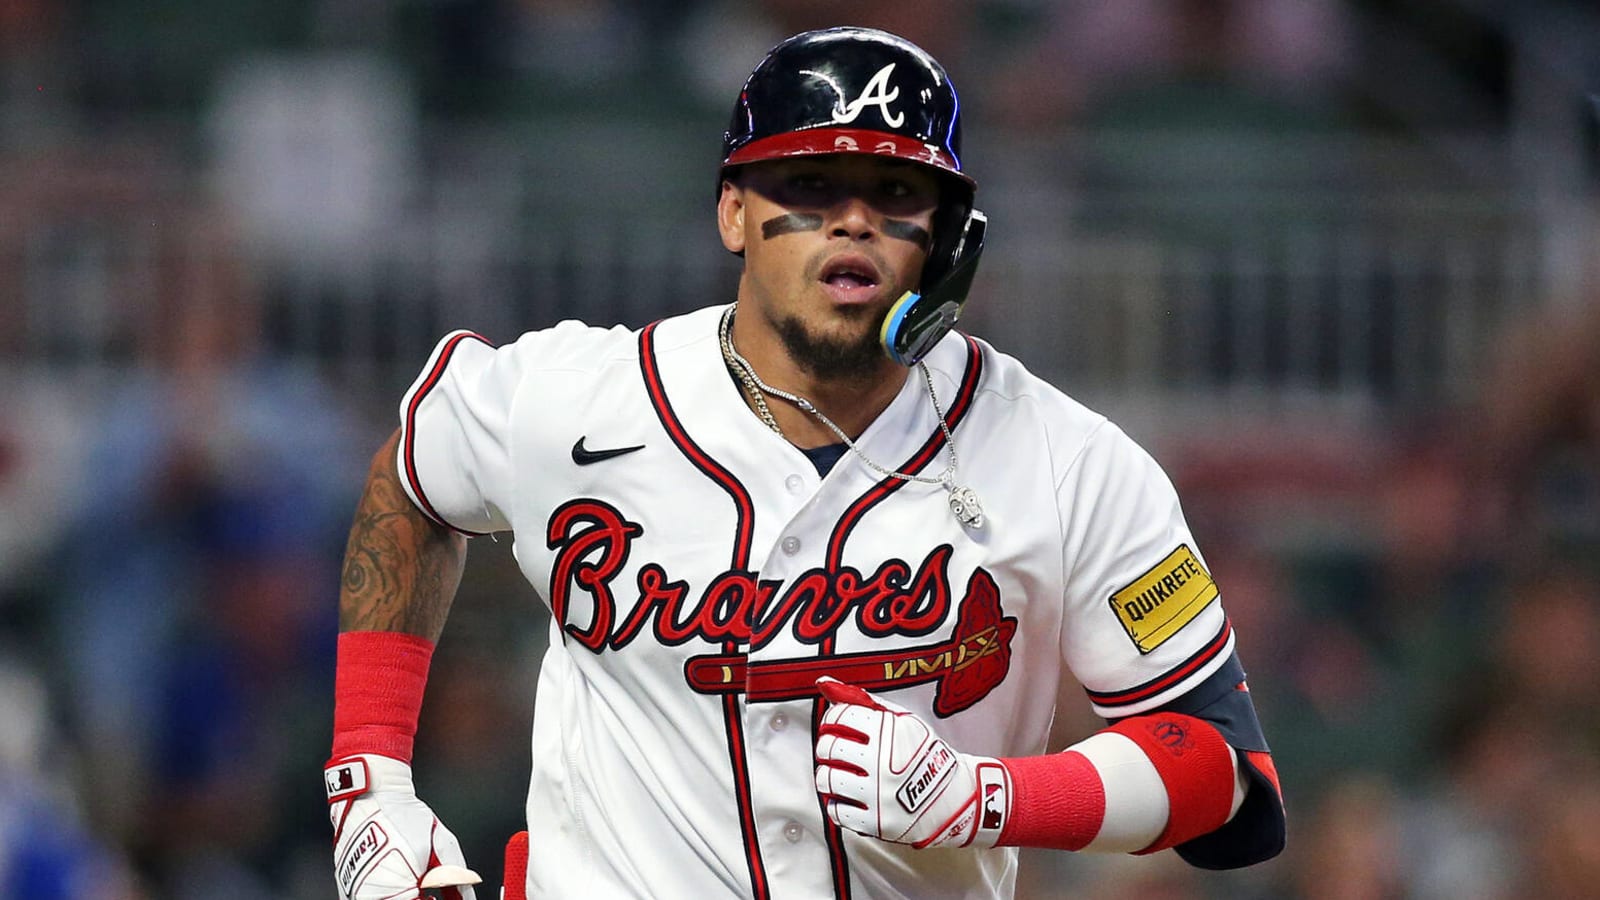 Orlando Arcia upset that comments on Bryce Harper leaked